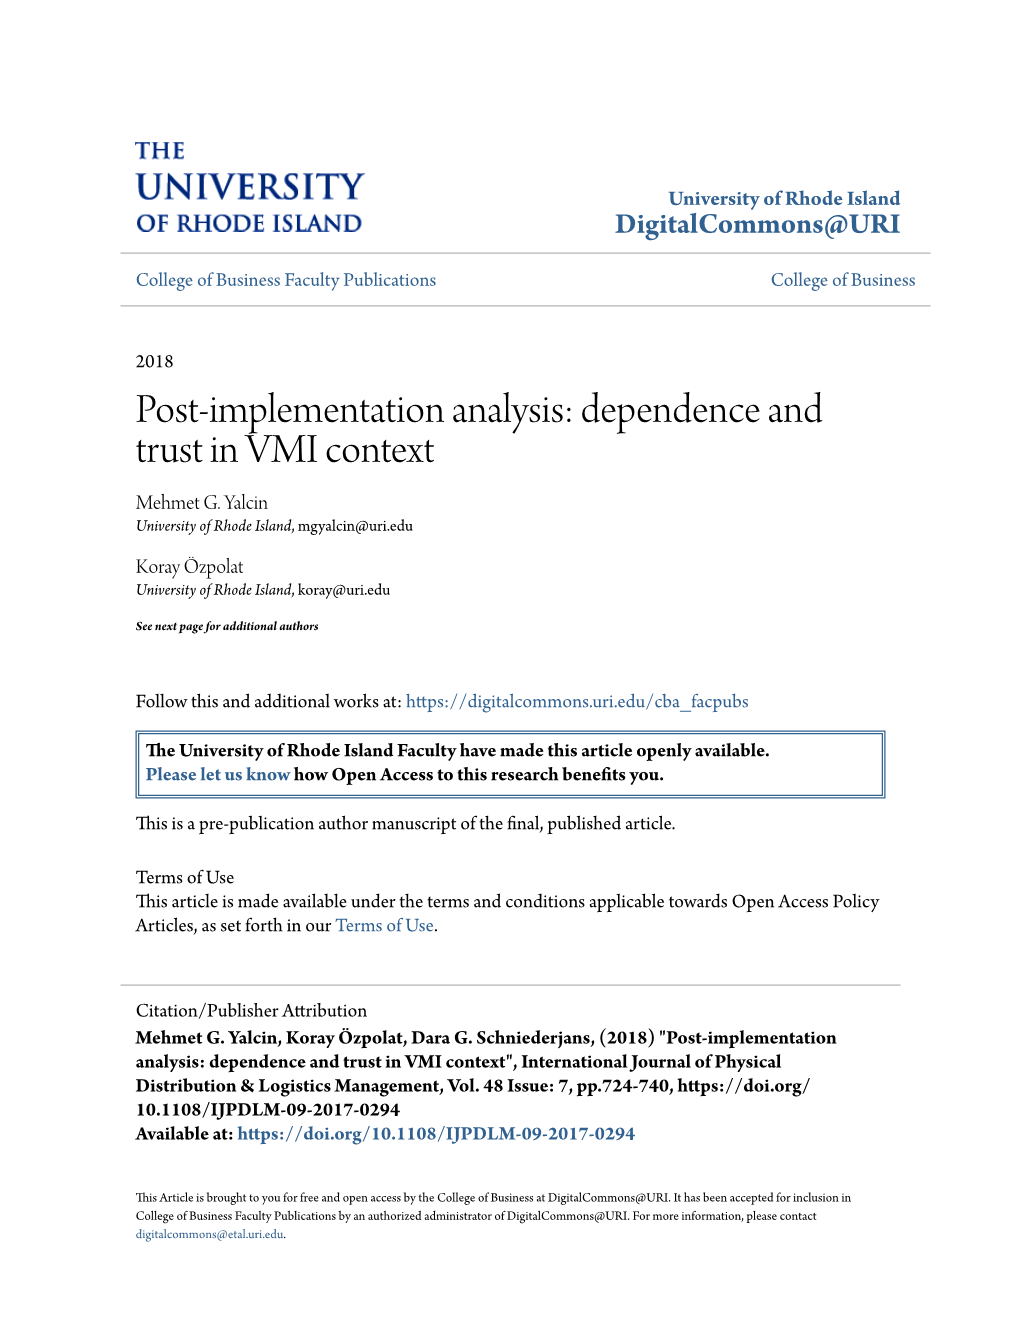 Dependence and Trust in VMI Context Mehmet G